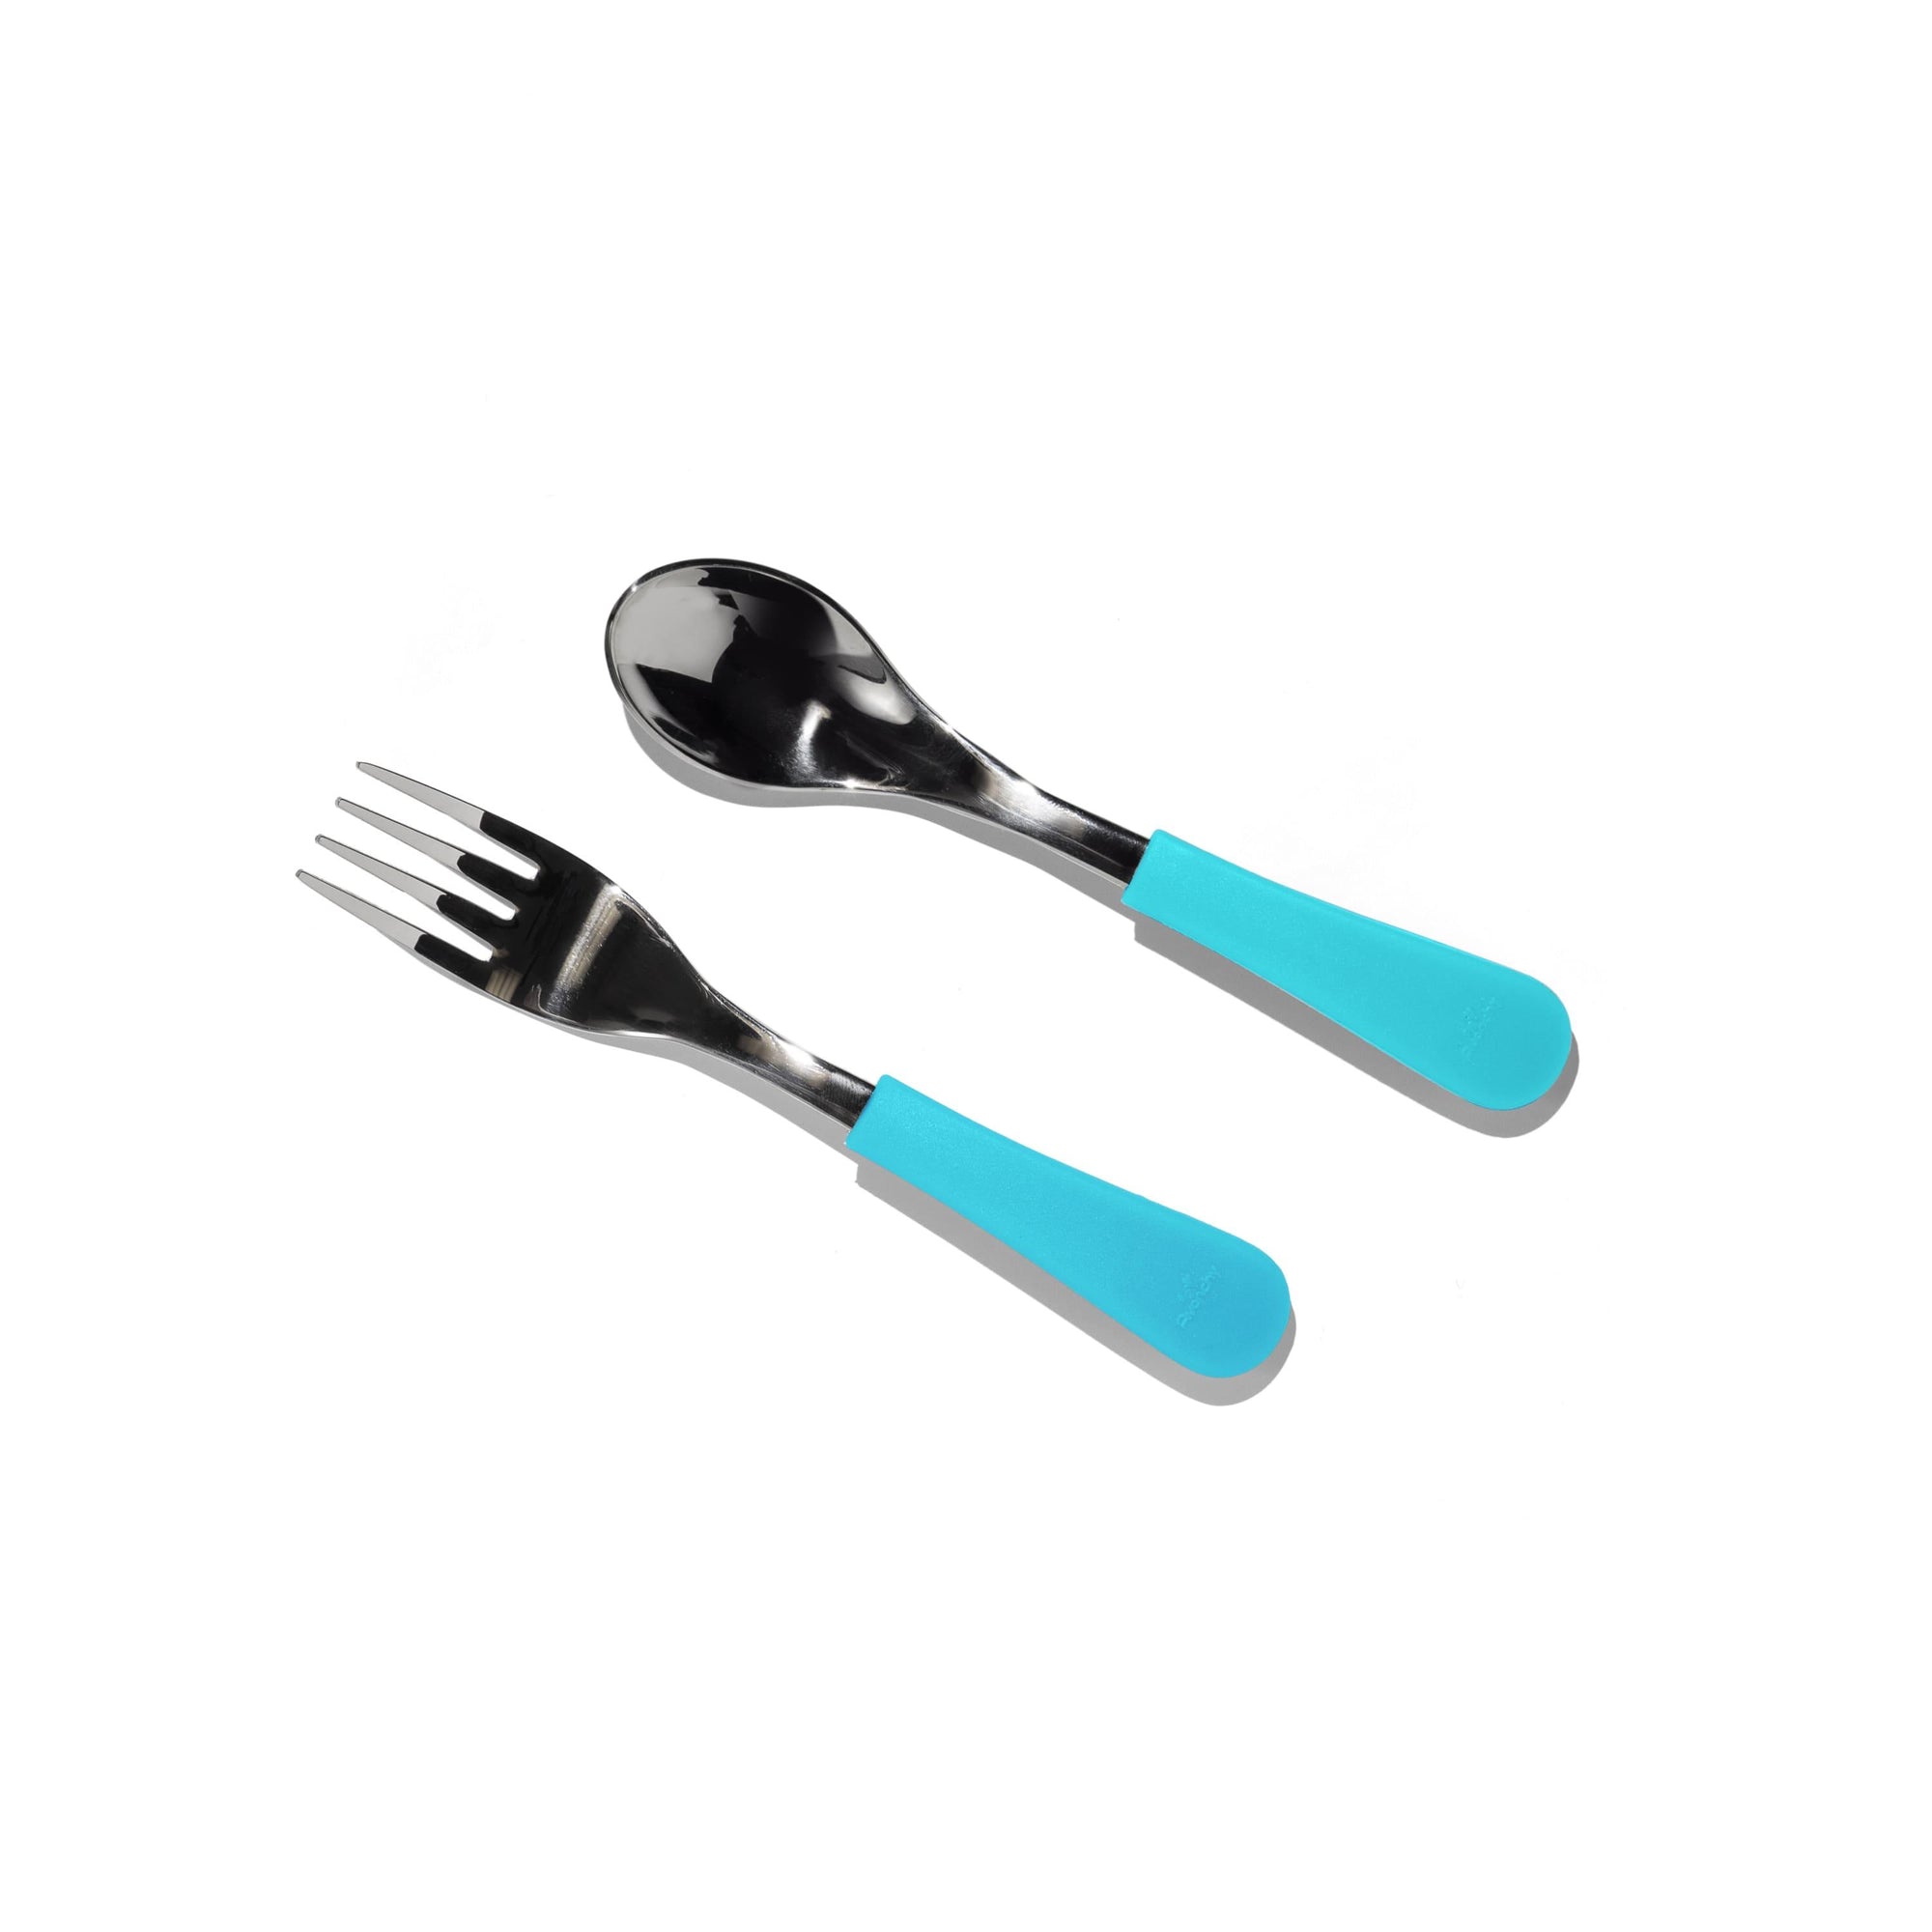 Stainless Steel Baby Forks, 2 Pack - Avanchy Sustainable Baby Dishware